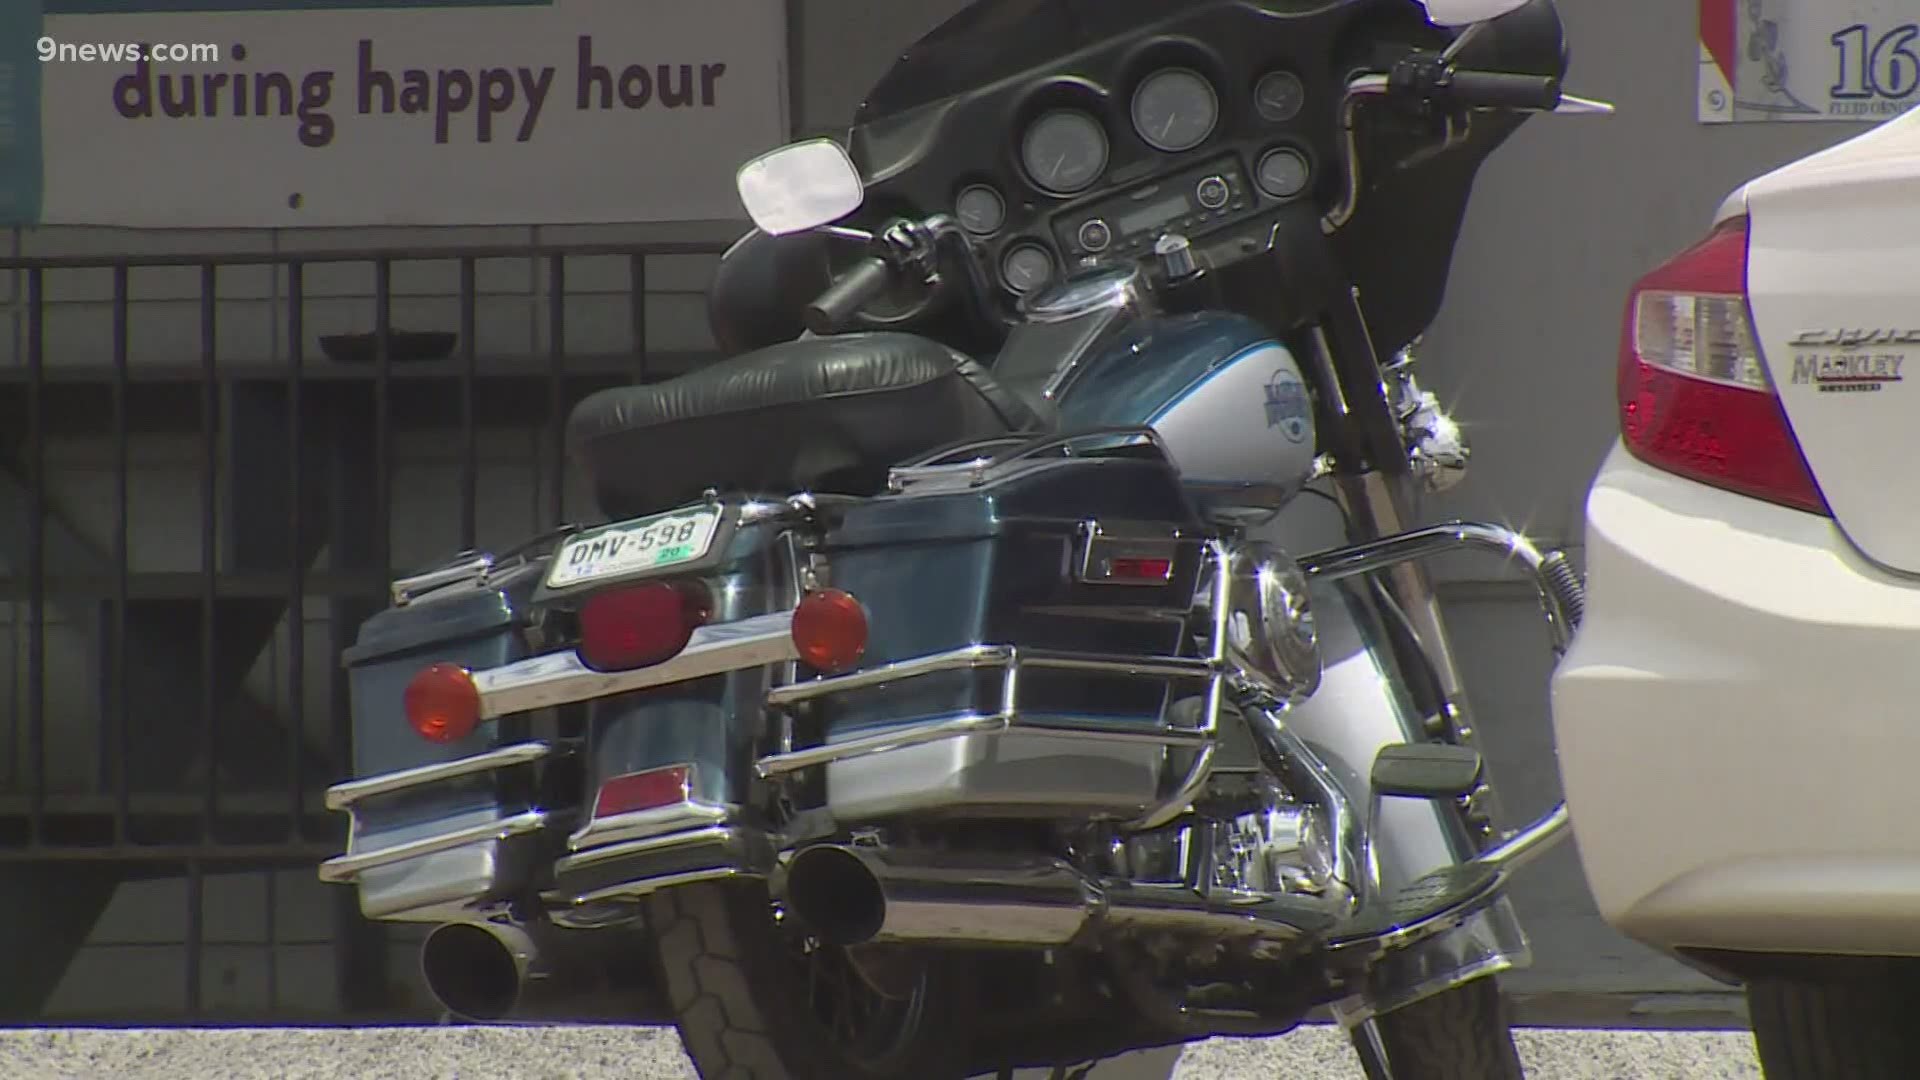 The incident appeared to be an altercation between motorcycle groups, Arvada Police said.